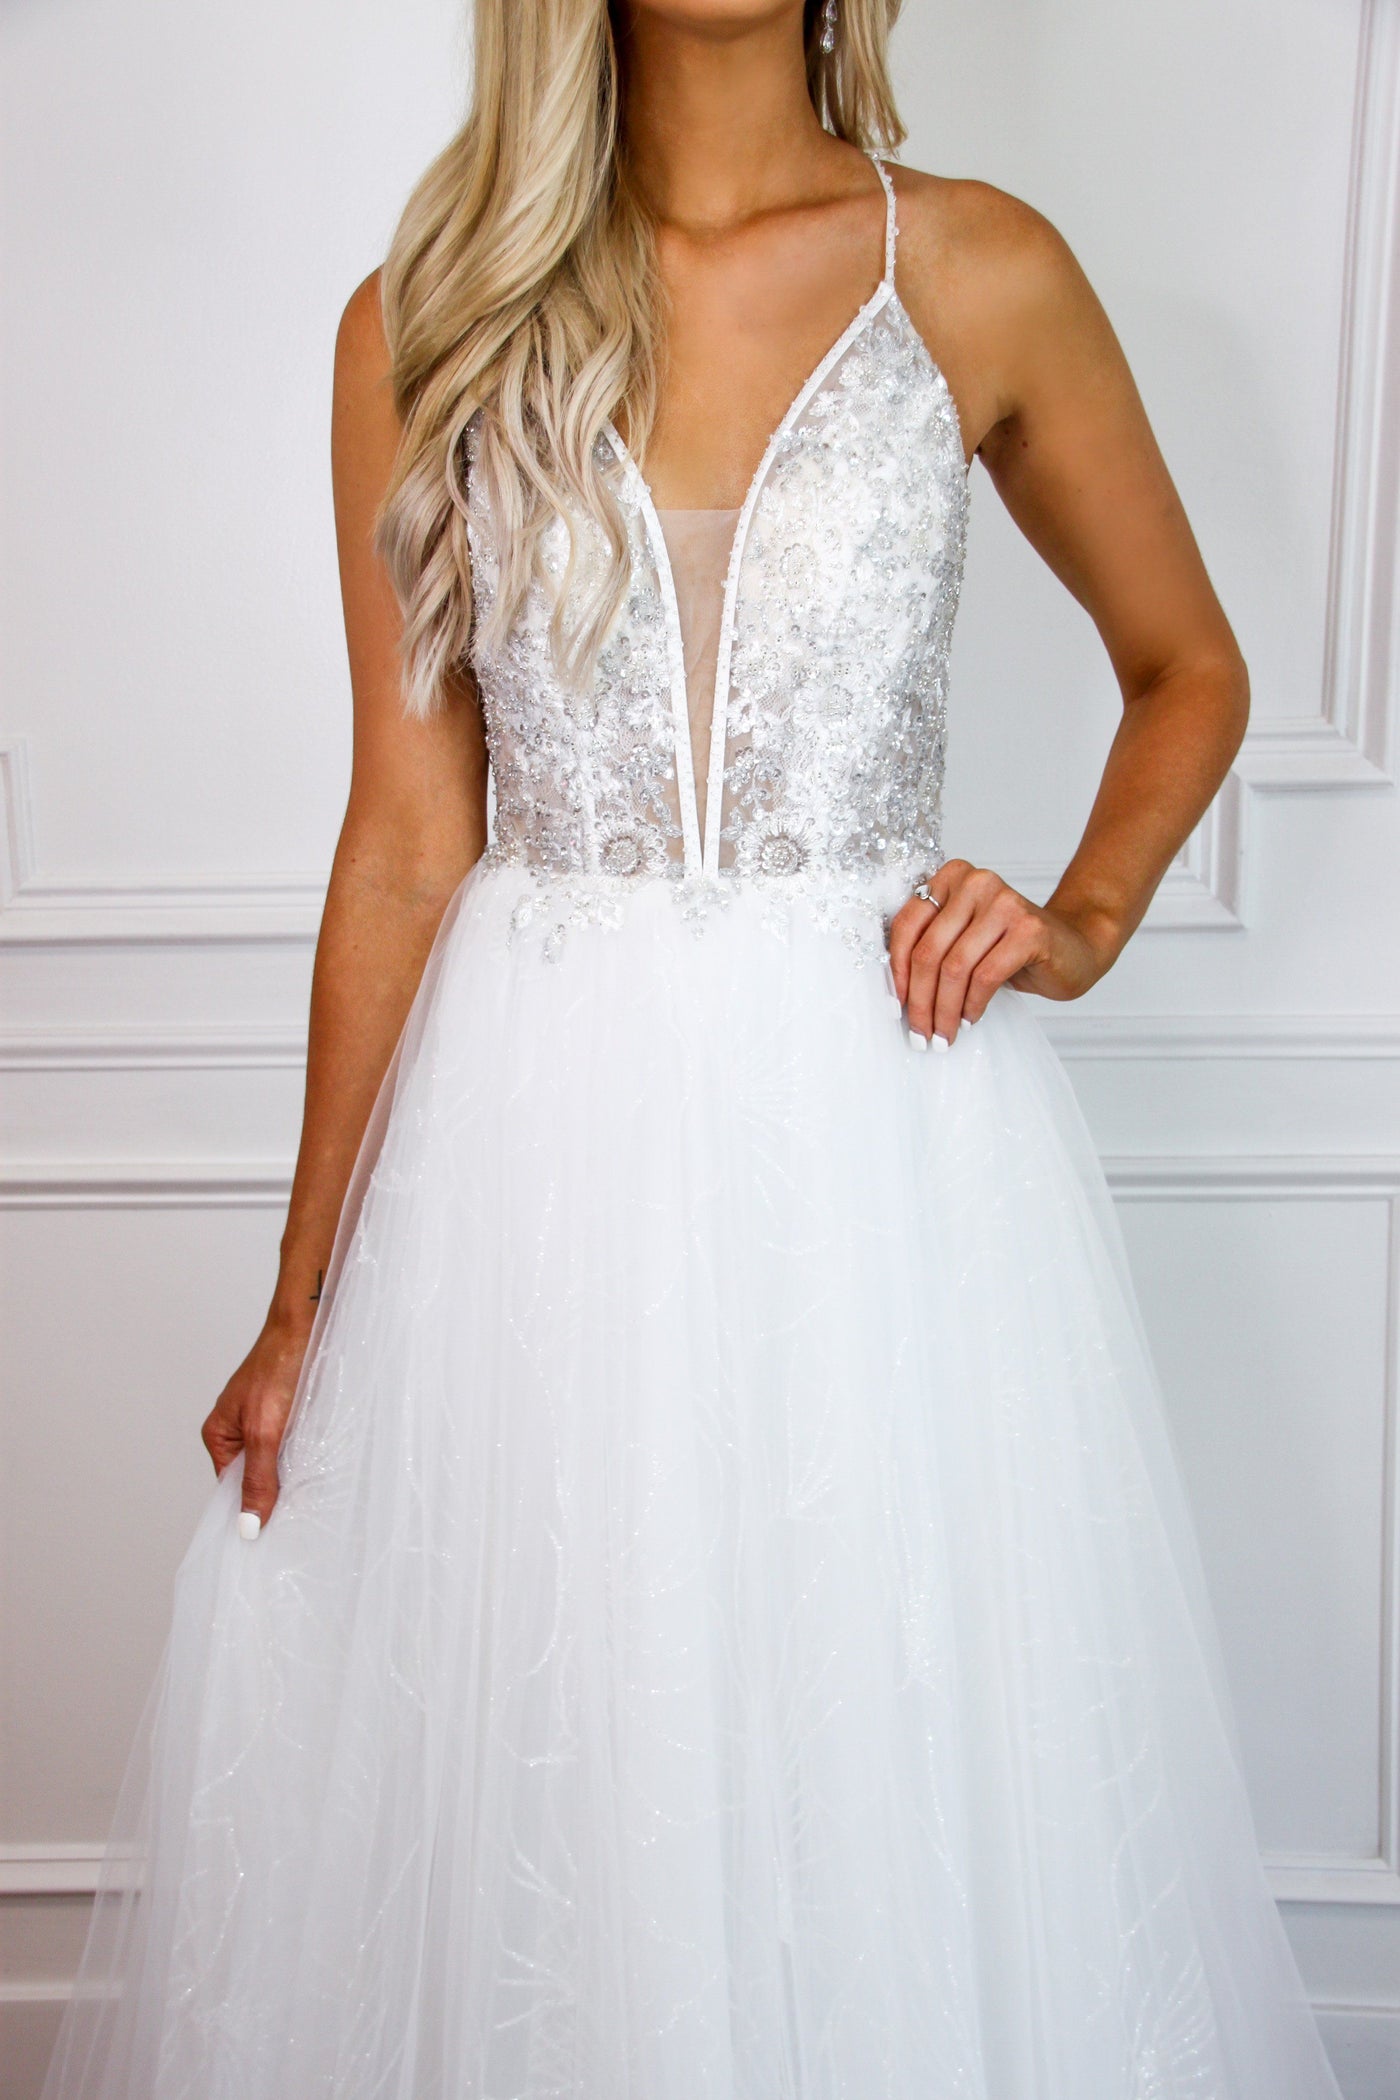 Fit For a Princess Embellished Wedding Dress: White - Bella and Bloom Boutique